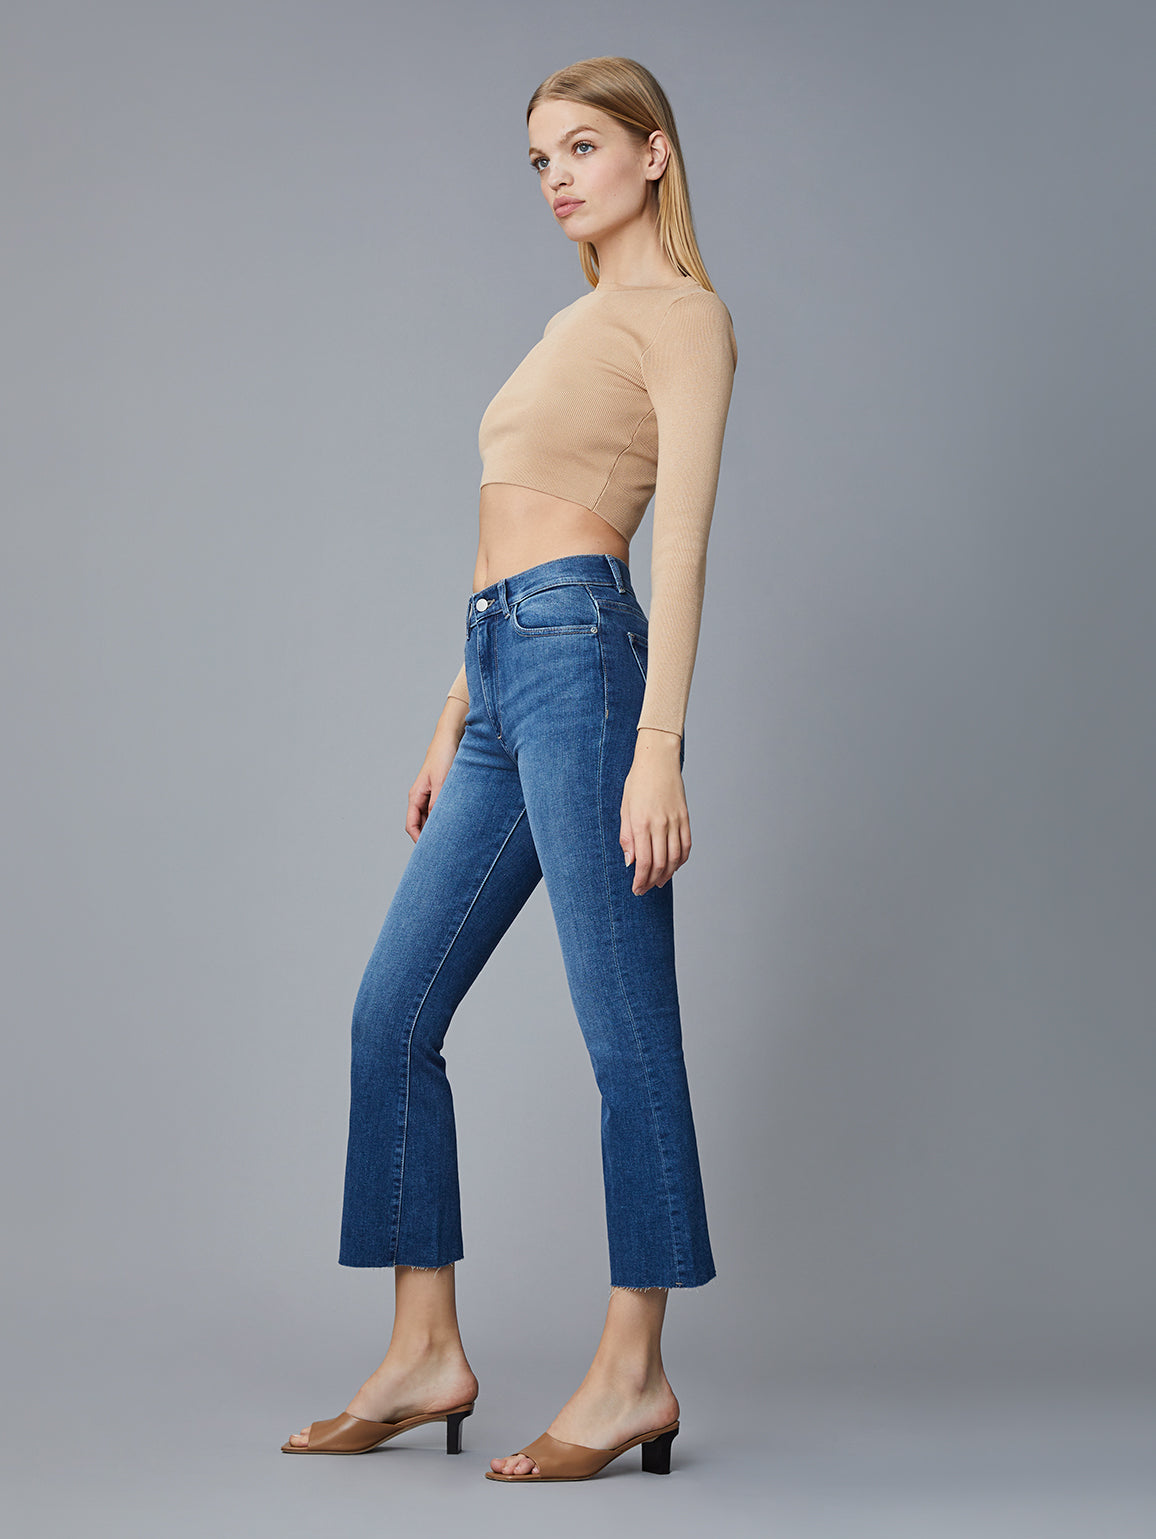 Bridget Cropped High Rise Jean in Mid Raw